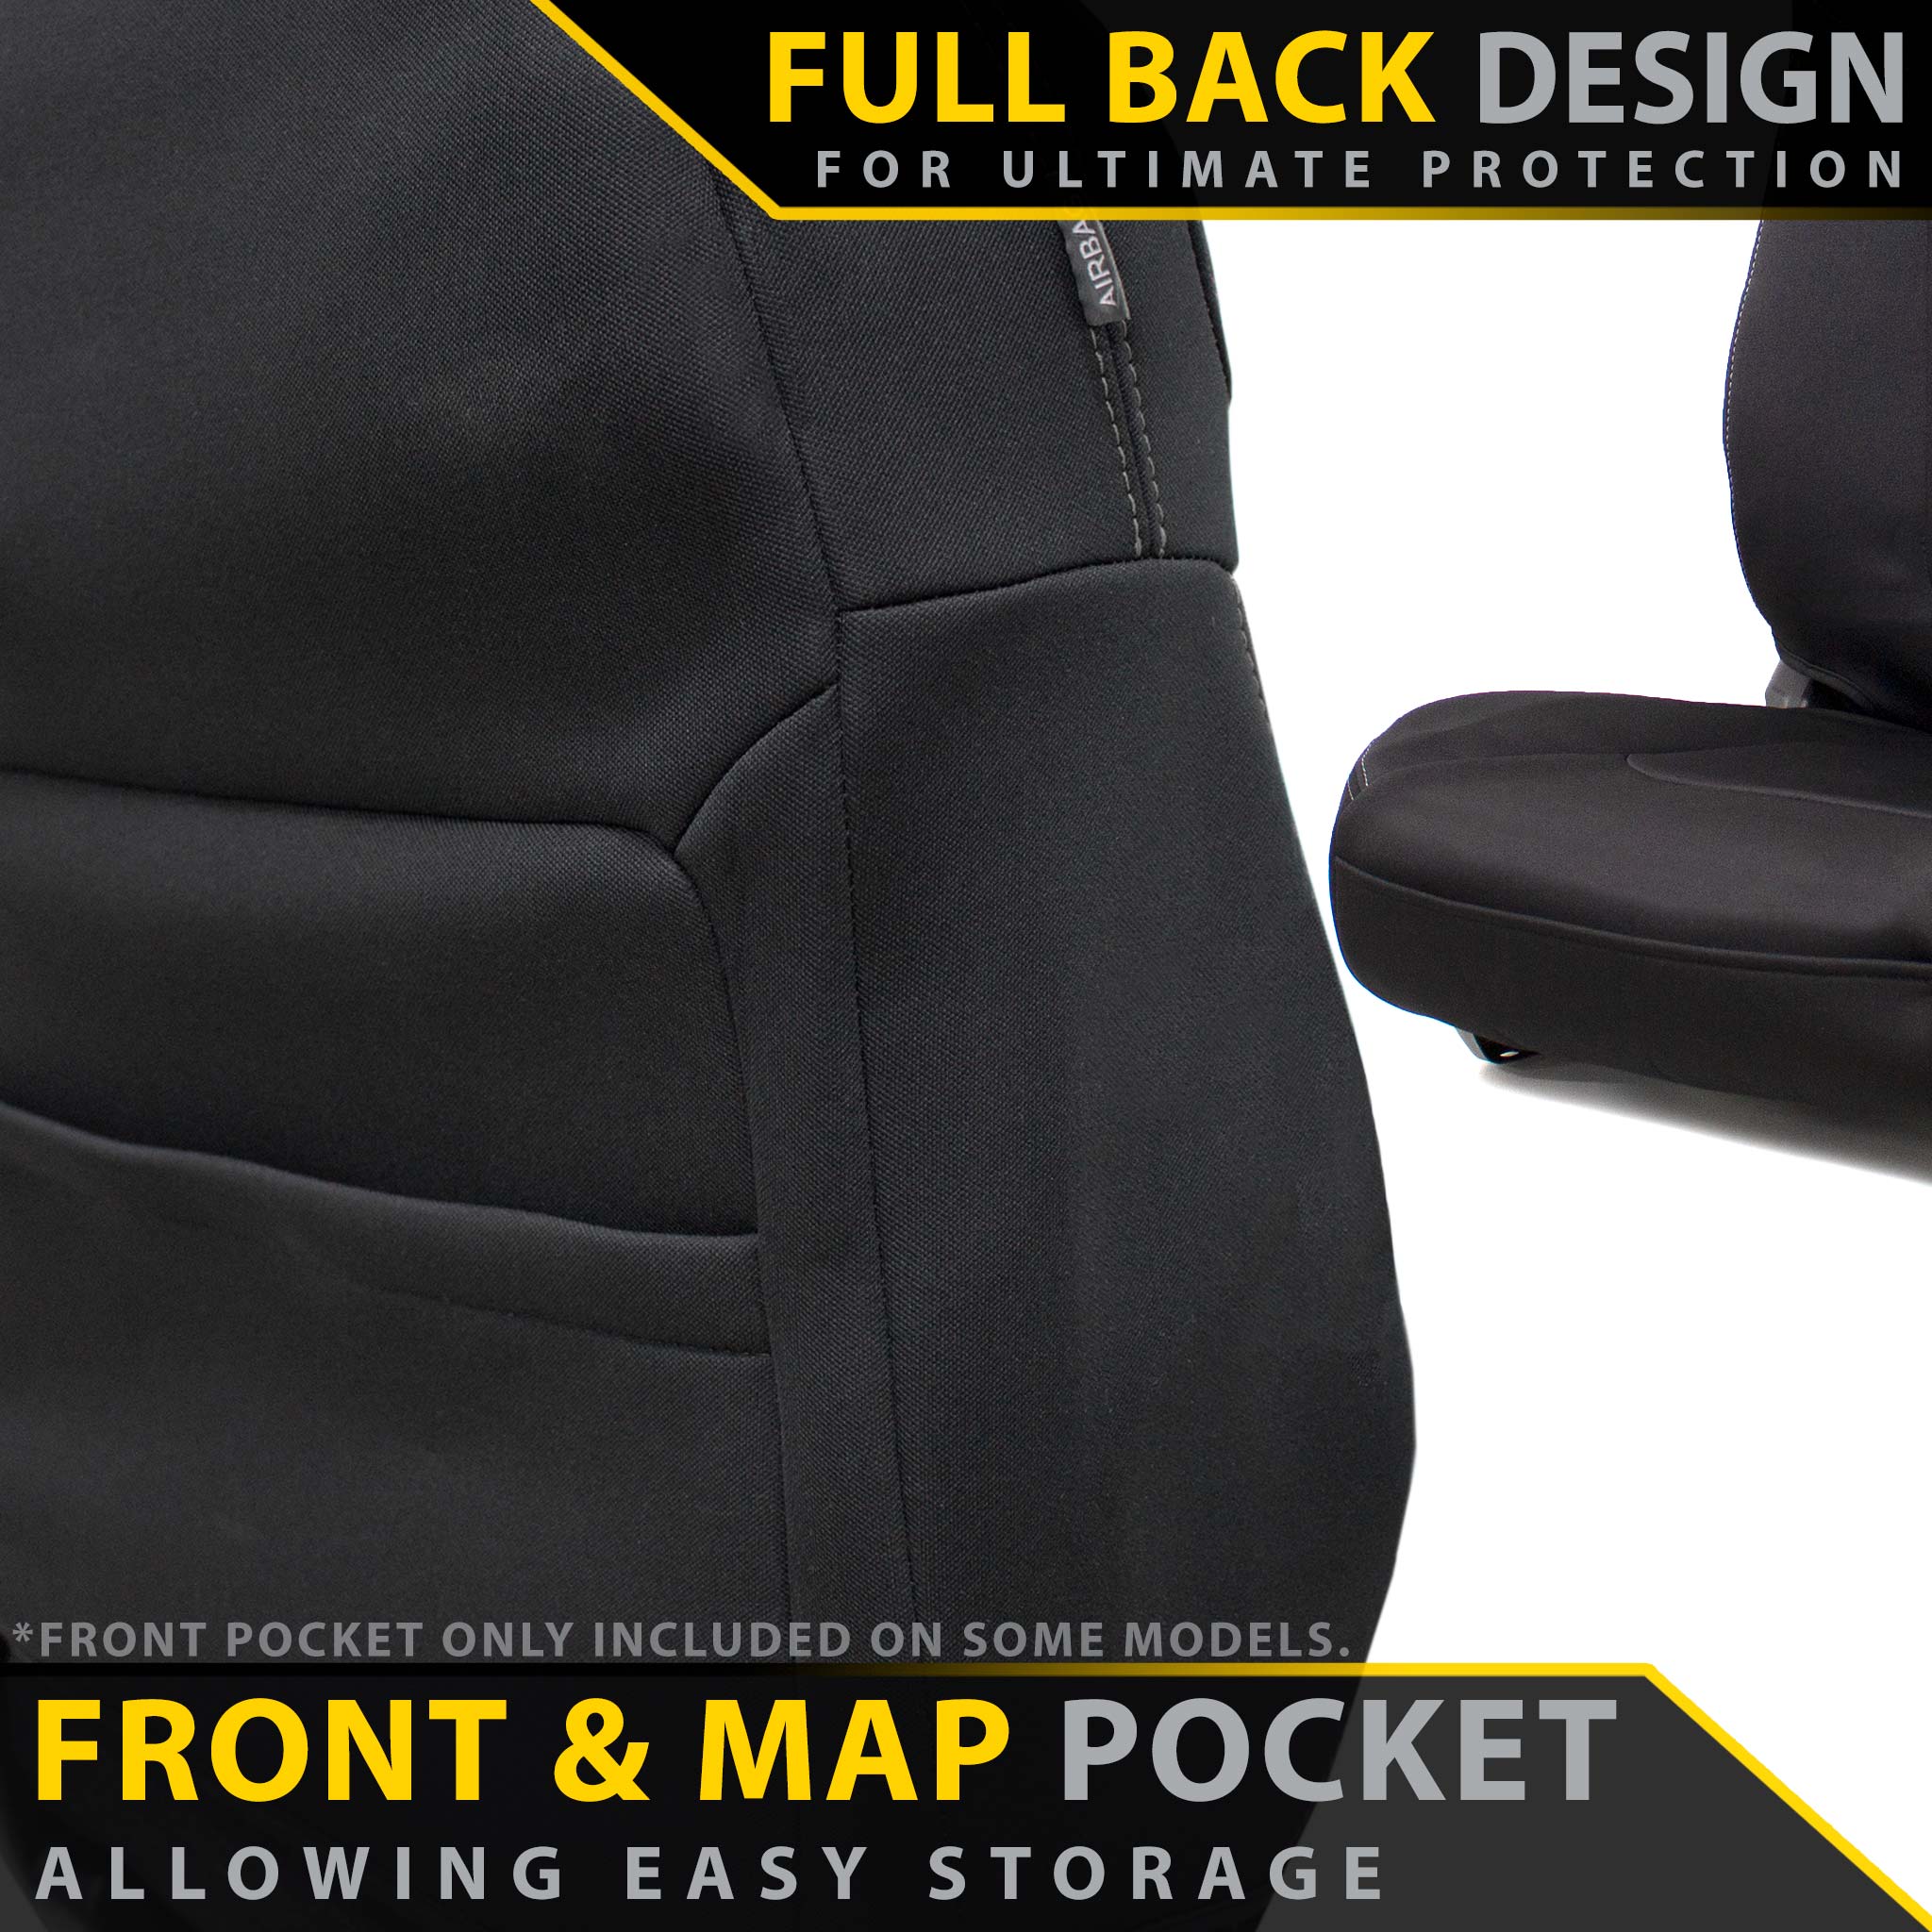 Toyota Hilux 7th Gen Workmate Bucket + 3/4 Bench Seat Neoprene 2x Front Seat Covers (No Logo)